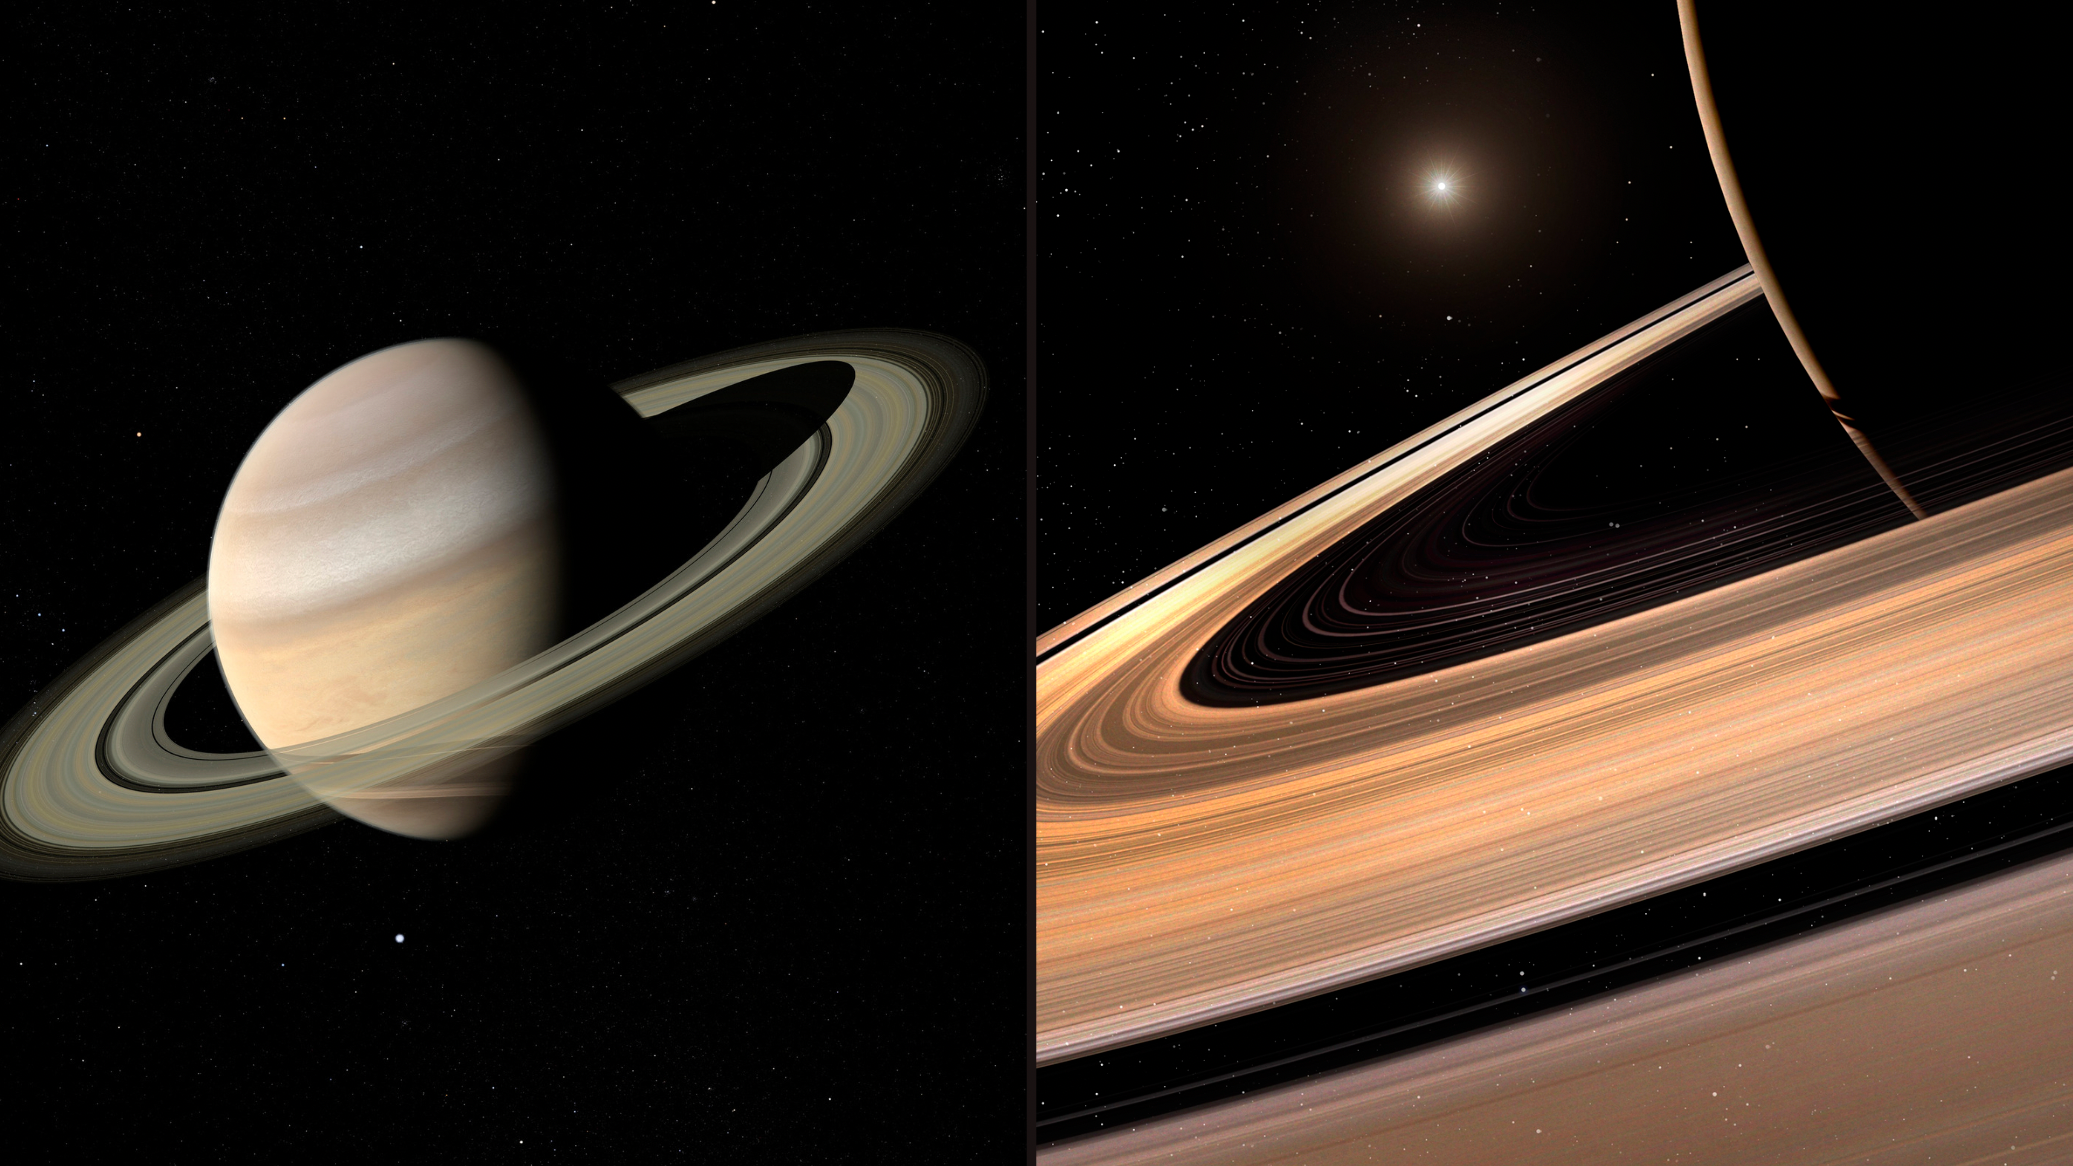 What Are Saturn's Rings Made Of & What Do They Look Like?